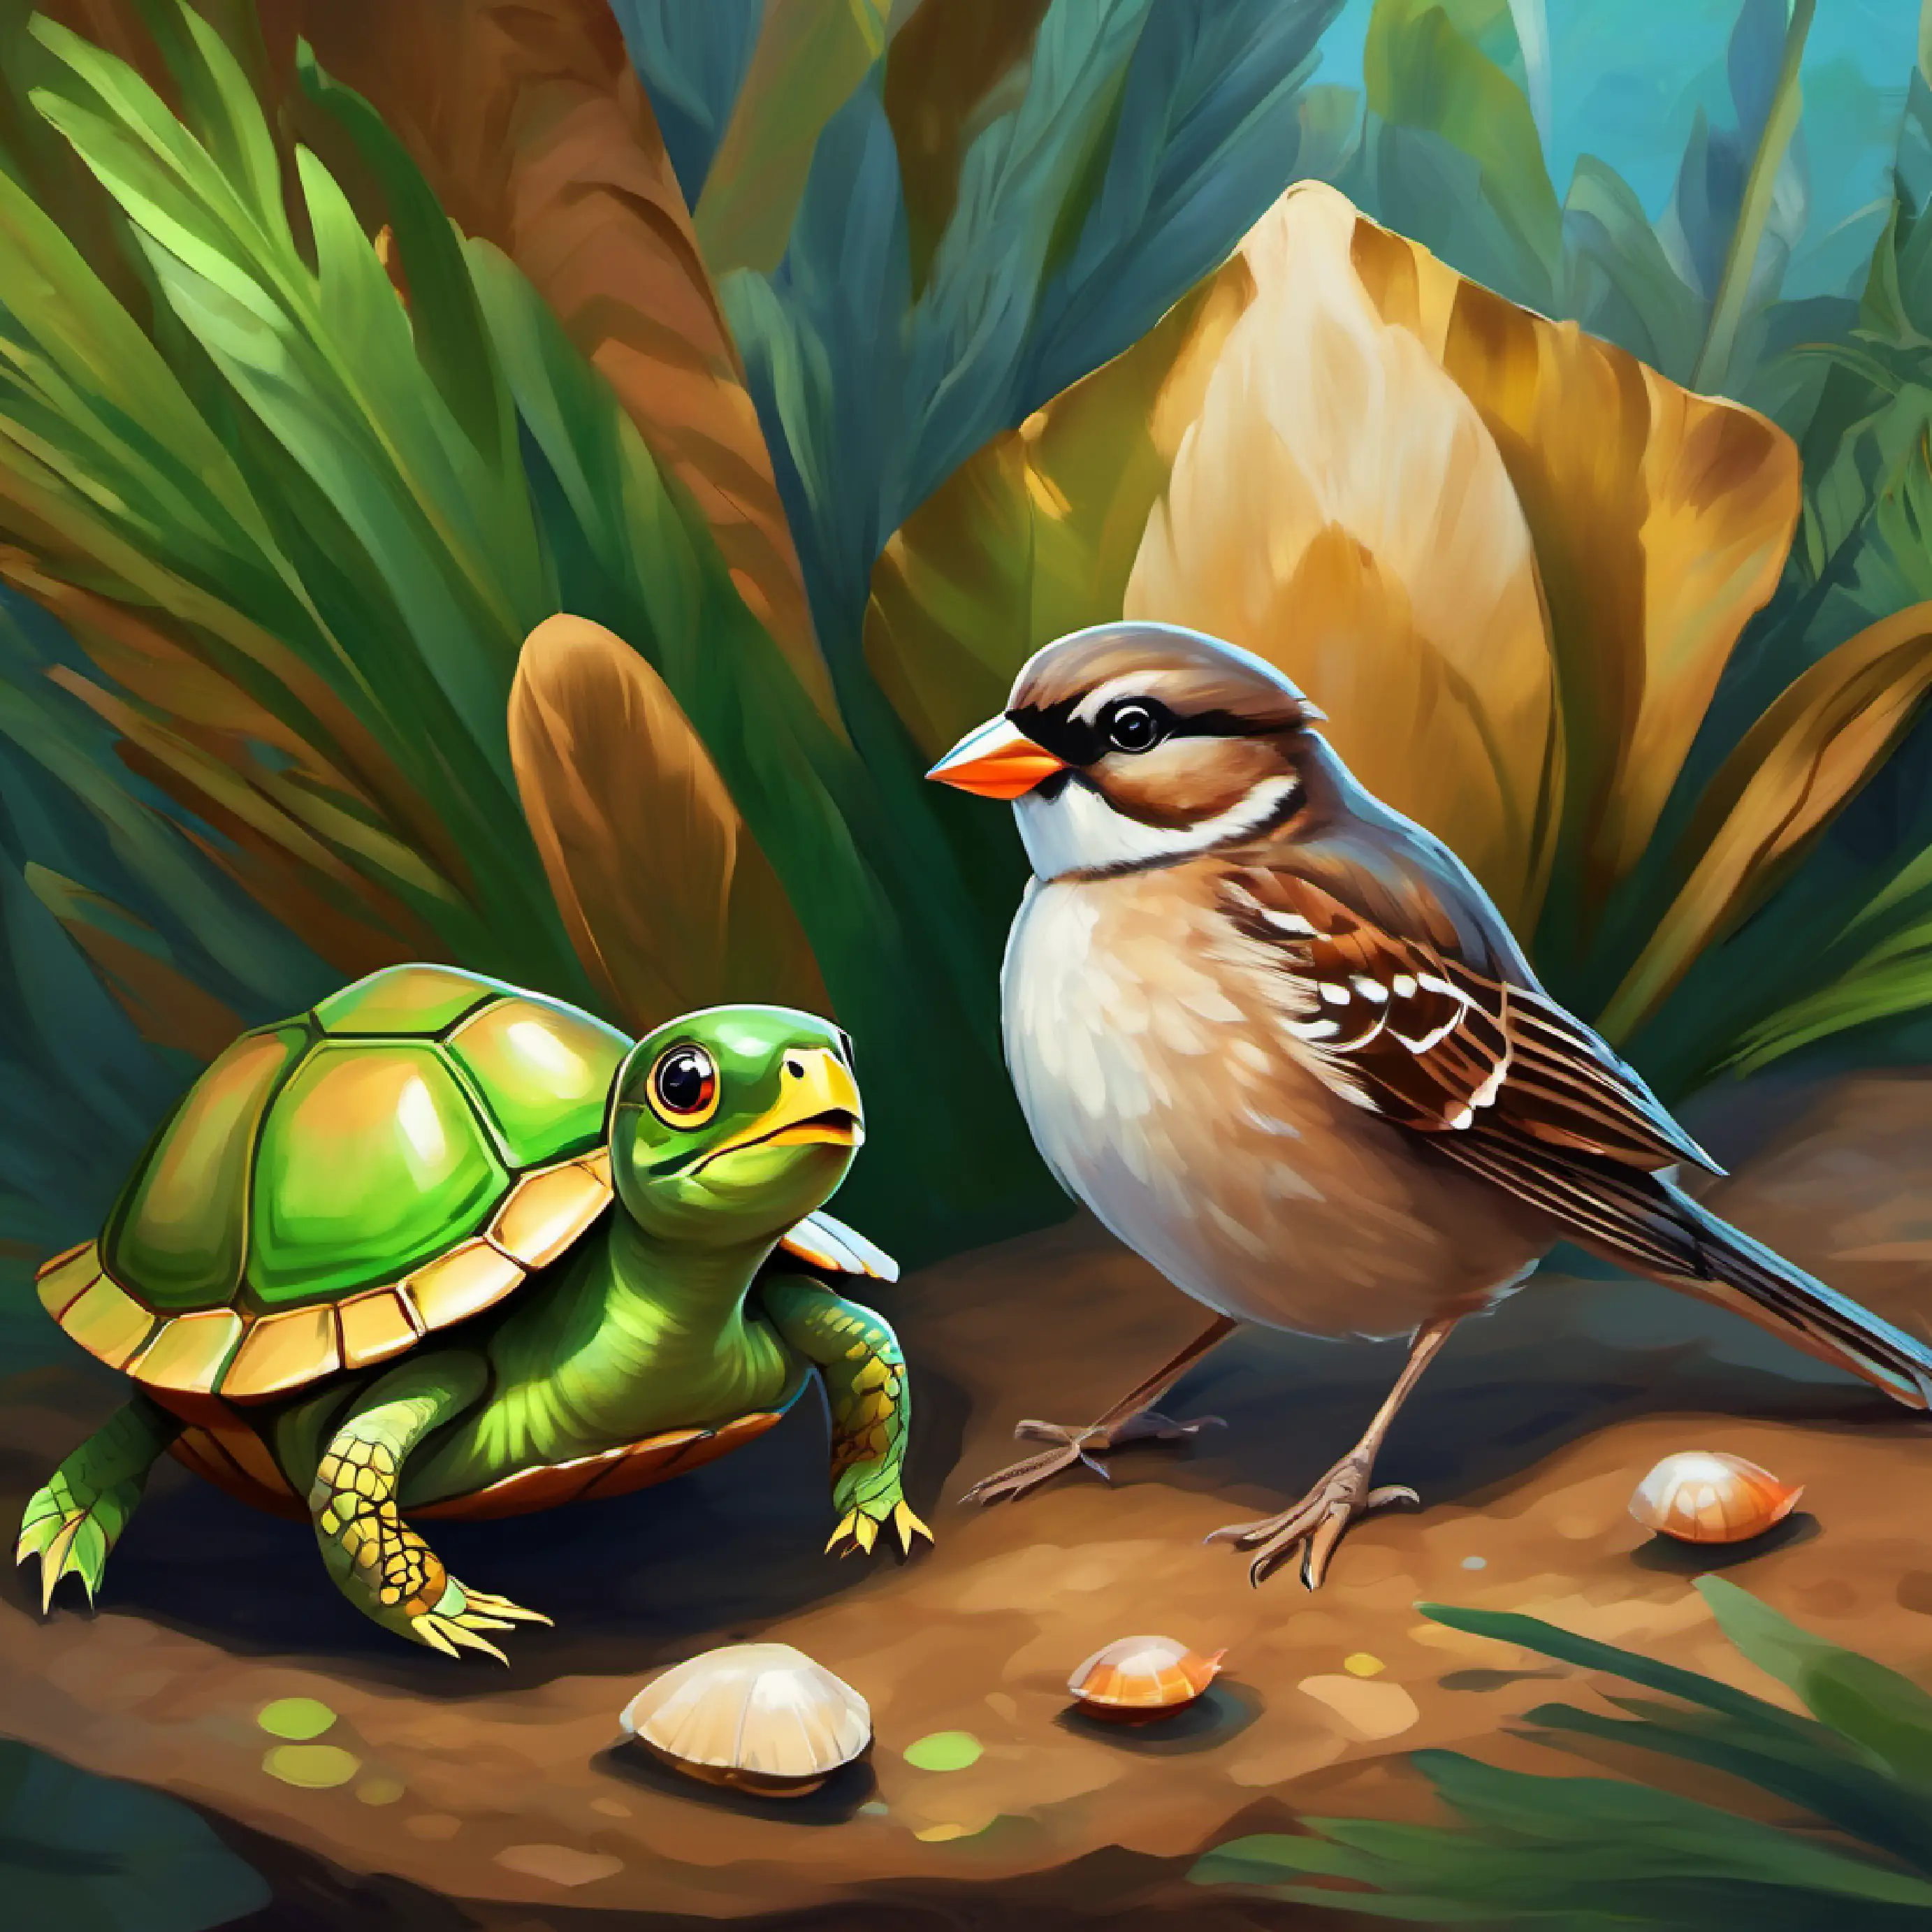 Small sparrow, brown feathers, bright eyes talks to Green turtle, wise eyes, brown shell, discovers his problem